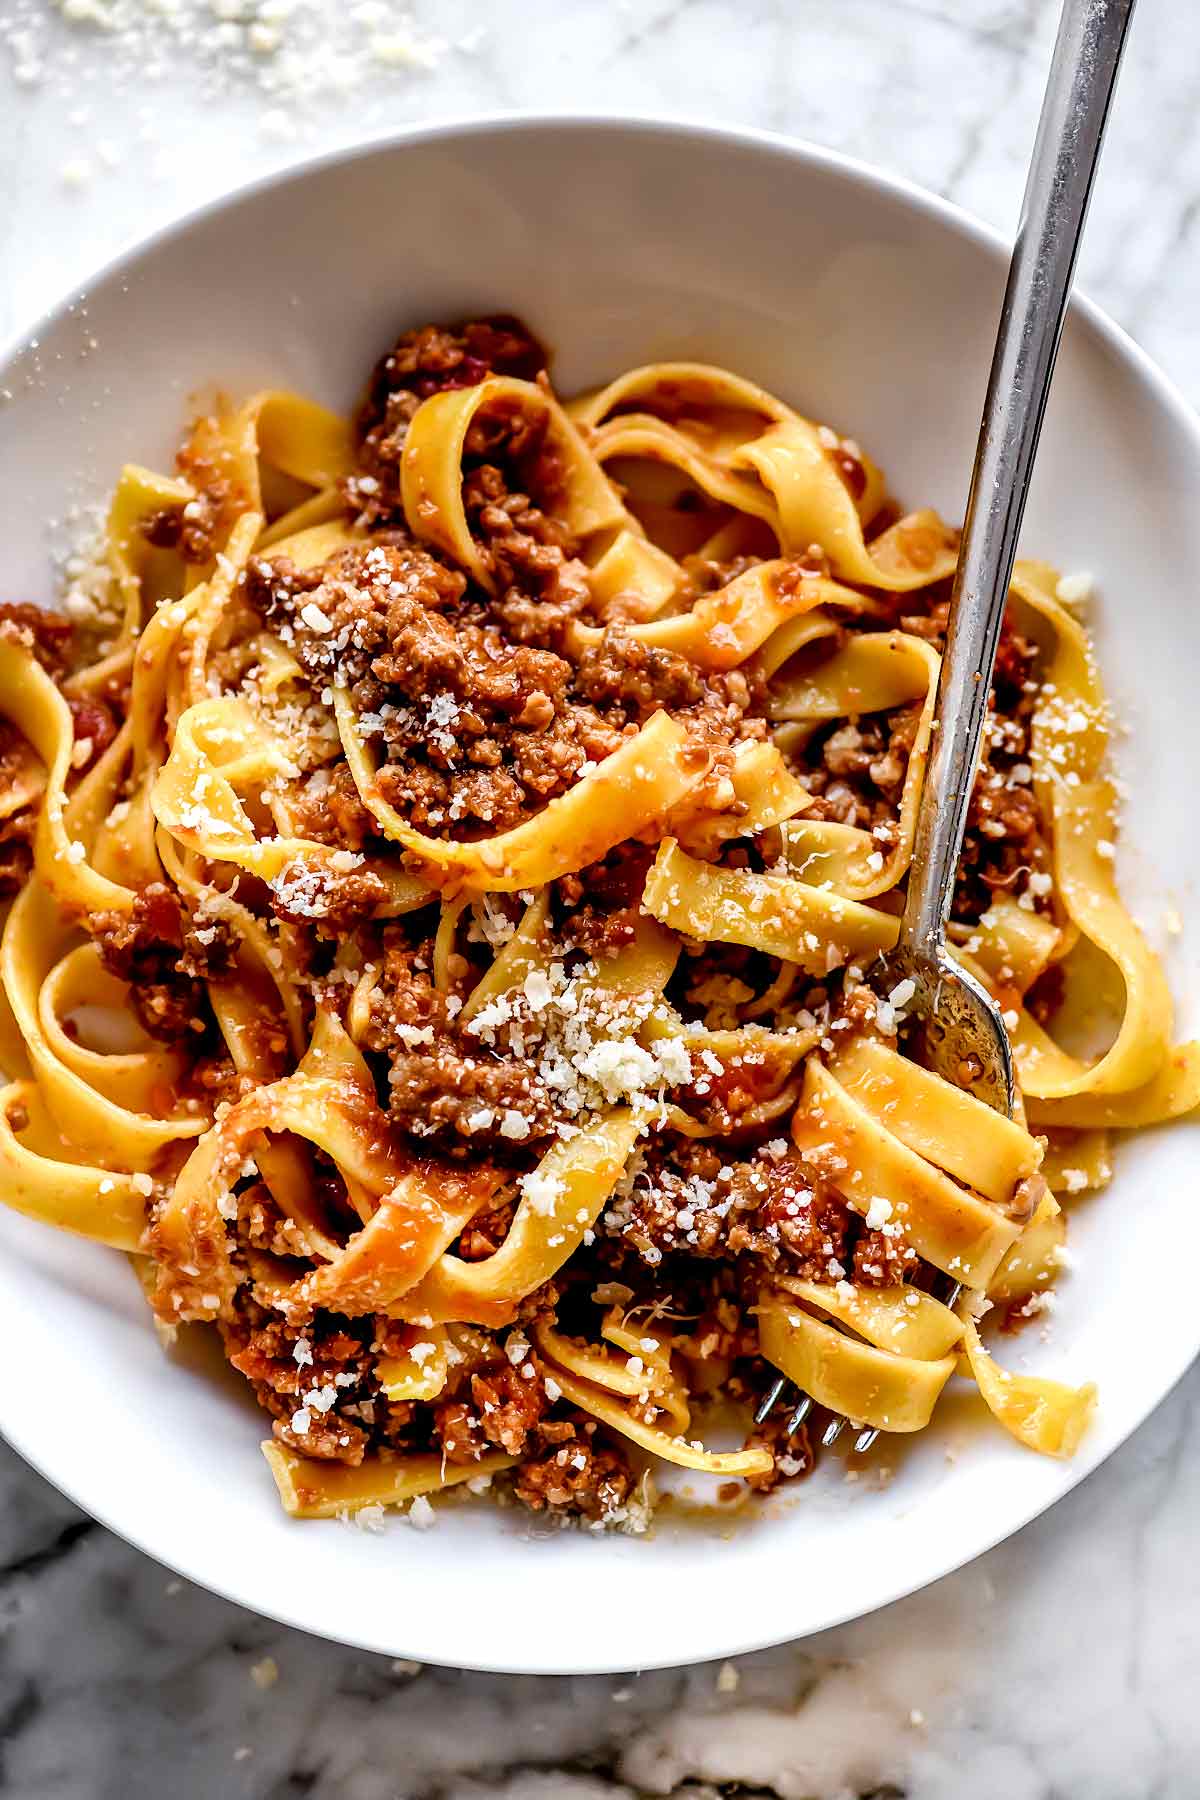 The BEST Bolognese Sauce Recipe - Workout Ideas, Healthy-Eating Recipes ...